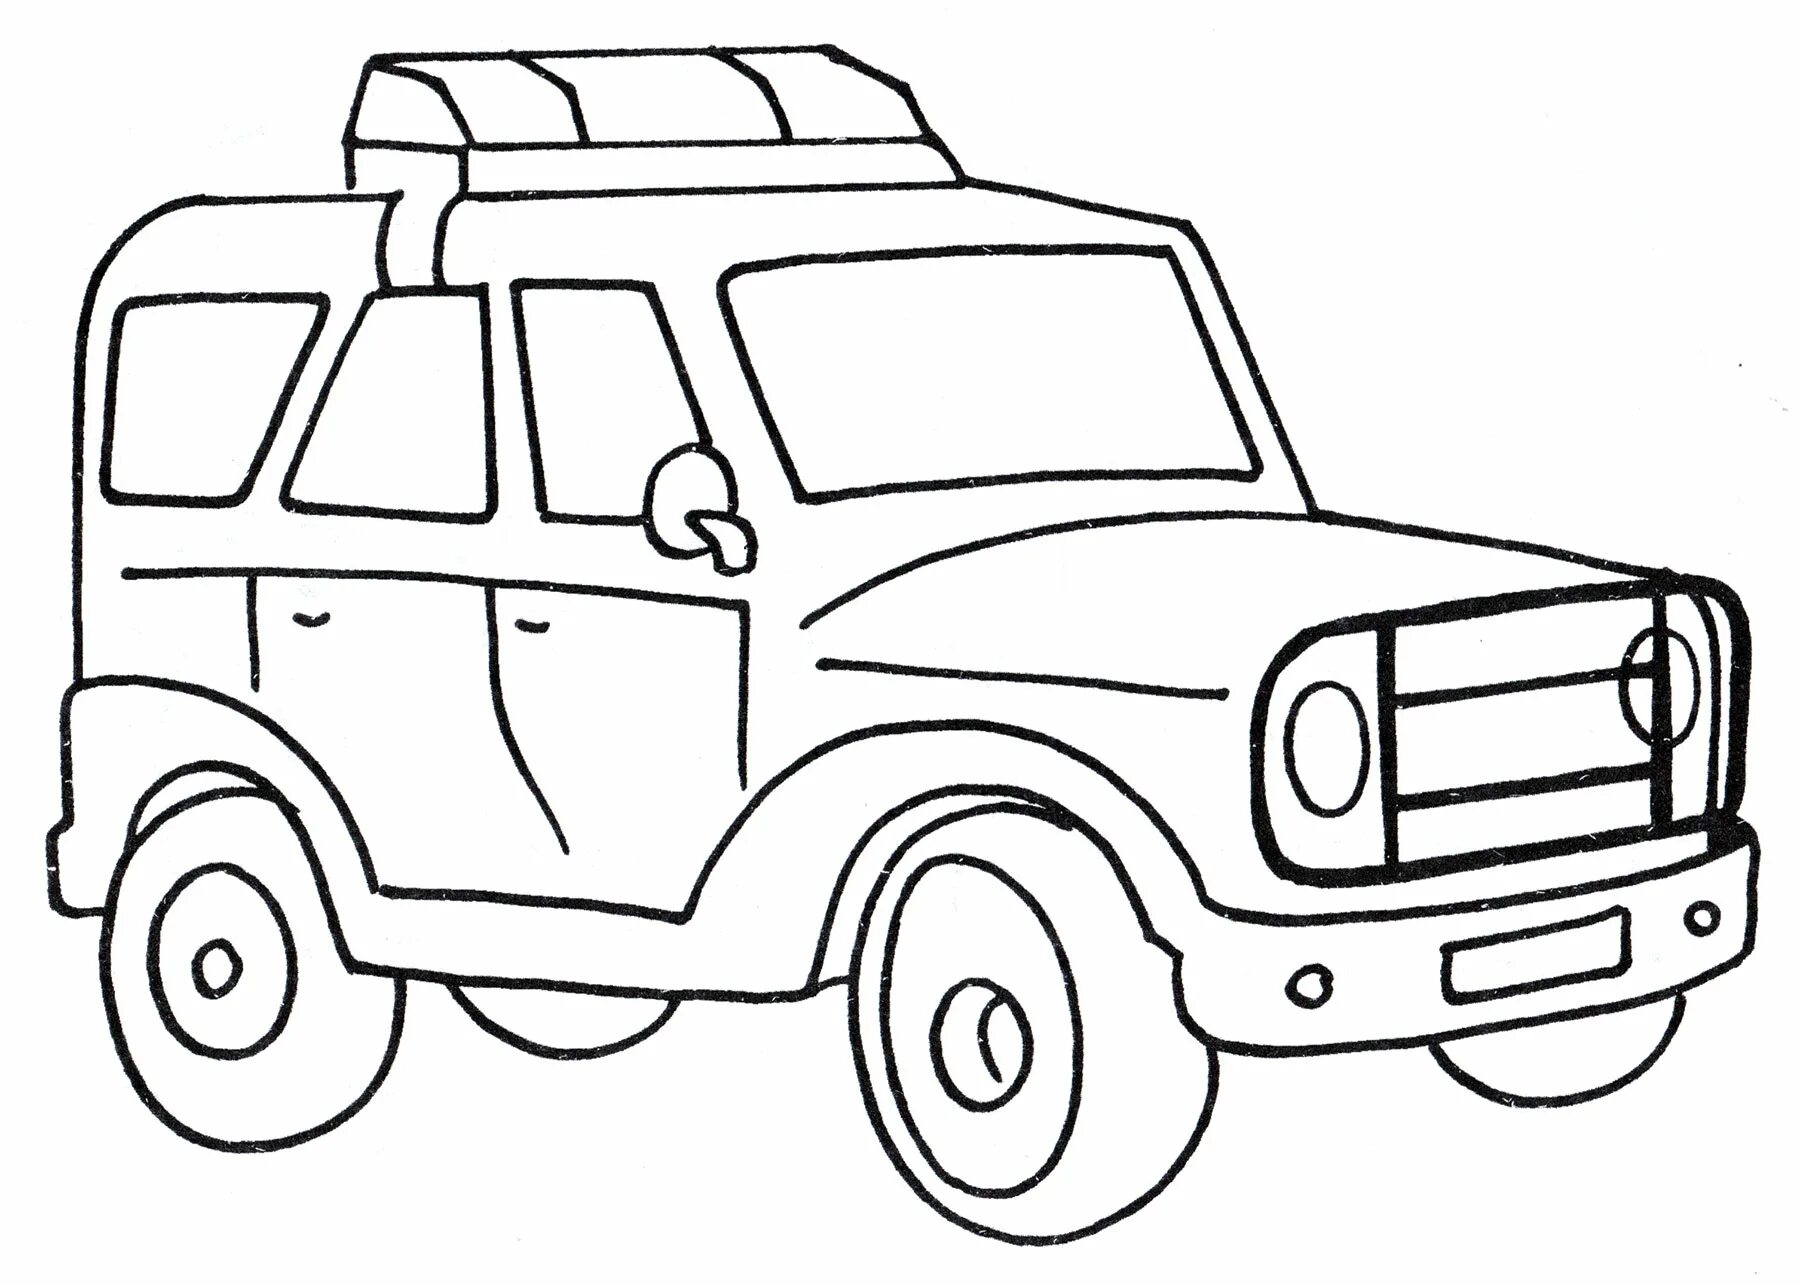 Cute police car coloring book for kids